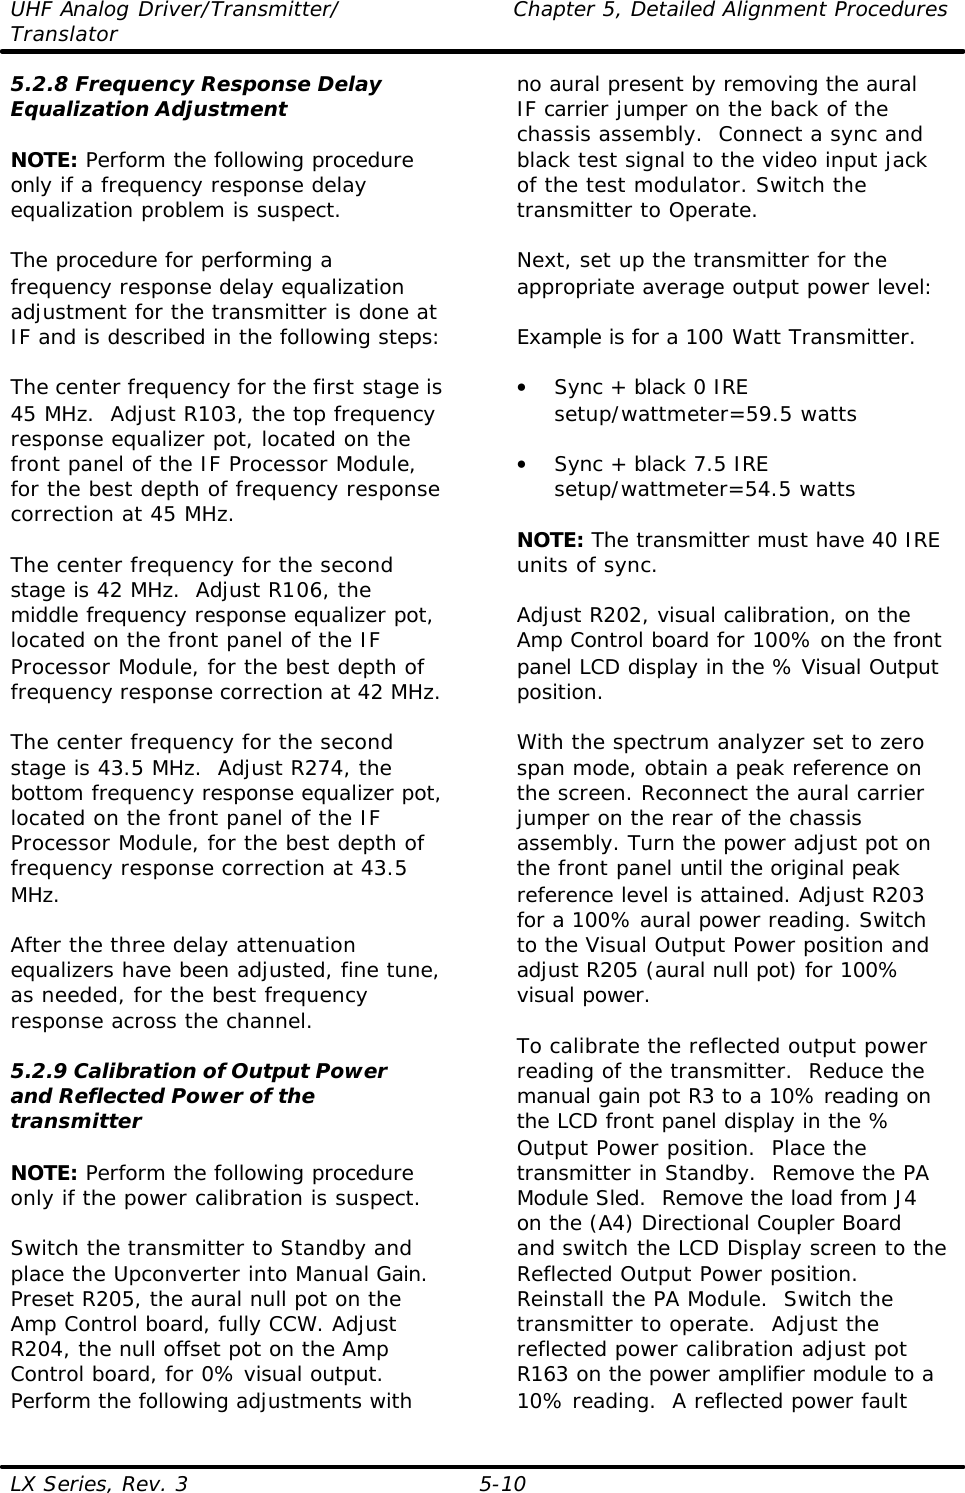 UHF Analog Driver/Transmitter/ Chapter 5, Detailed Alignment Procedures Translator  LX Series, Rev. 3 5-10 5.2.8 Frequency Response Delay Equalization Adjustment  NOTE: Perform the following procedure only if a frequency response delay equalization problem is suspect.  The procedure for performing a frequency response delay equalization adjustment for the transmitter is done at IF and is described in the following steps:  The center frequency for the first stage is 45 MHz.  Adjust R103, the top frequency response equalizer pot, located on the front panel of the IF Processor Module, for the best depth of frequency response correction at 45 MHz.  The center frequency for the second stage is 42 MHz.  Adjust R106, the middle frequency response equalizer pot, located on the front panel of the IF Processor Module, for the best depth of frequency response correction at 42 MHz.  The center frequency for the second stage is 43.5 MHz.  Adjust R274, the bottom frequency response equalizer pot, located on the front panel of the IF Processor Module, for the best depth of frequency response correction at 43.5 MHz.  After the three delay attenuation equalizers have been adjusted, fine tune, as needed, for the best frequency response across the channel.  5.2.9 Calibration of Output Power and Reflected Power of the transmitter  NOTE: Perform the following procedure only if the power calibration is suspect.  Switch the transmitter to Standby and place the Upconverter into Manual Gain.  Preset R205, the aural null pot on the Amp Control board, fully CCW. Adjust R204, the null offset pot on the Amp Control board, for 0% visual output. Perform the following adjustments with no aural present by removing the aural IF carrier jumper on the back of the chassis assembly.  Connect a sync and black test signal to the video input jack of the test modulator. Switch the transmitter to Operate.  Next, set up the transmitter for the appropriate average output power level:  Example is for a 100 Watt Transmitter.  • Sync + black 0 IRE setup/wattmeter=59.5 watts  • Sync + black 7.5 IRE setup/wattmeter=54.5 watts    NOTE: The transmitter must have 40 IRE units of sync.   Adjust R202, visual calibration, on the Amp Control board for 100% on the front panel LCD display in the % Visual Output position.  With the spectrum analyzer set to zero span mode, obtain a peak reference on the screen. Reconnect the aural carrier jumper on the rear of the chassis assembly. Turn the power adjust pot on the front panel until the original peak reference level is attained. Adjust R203 for a 100% aural power reading. Switch to the Visual Output Power position and adjust R205 (aural null pot) for 100% visual power.  To calibrate the reflected output power reading of the transmitter.  Reduce the manual gain pot R3 to a 10% reading on the LCD front panel display in the % Output Power position.  Place the transmitter in Standby.  Remove the PA Module Sled.  Remove the load from J4 on the (A4) Directional Coupler Board and switch the LCD Display screen to the Reflected Output Power position.  Reinstall the PA Module.  Switch the transmitter to operate.  Adjust the reflected power calibration adjust pot R163 on the power amplifier module to a 10% reading.  A reflected power fault 